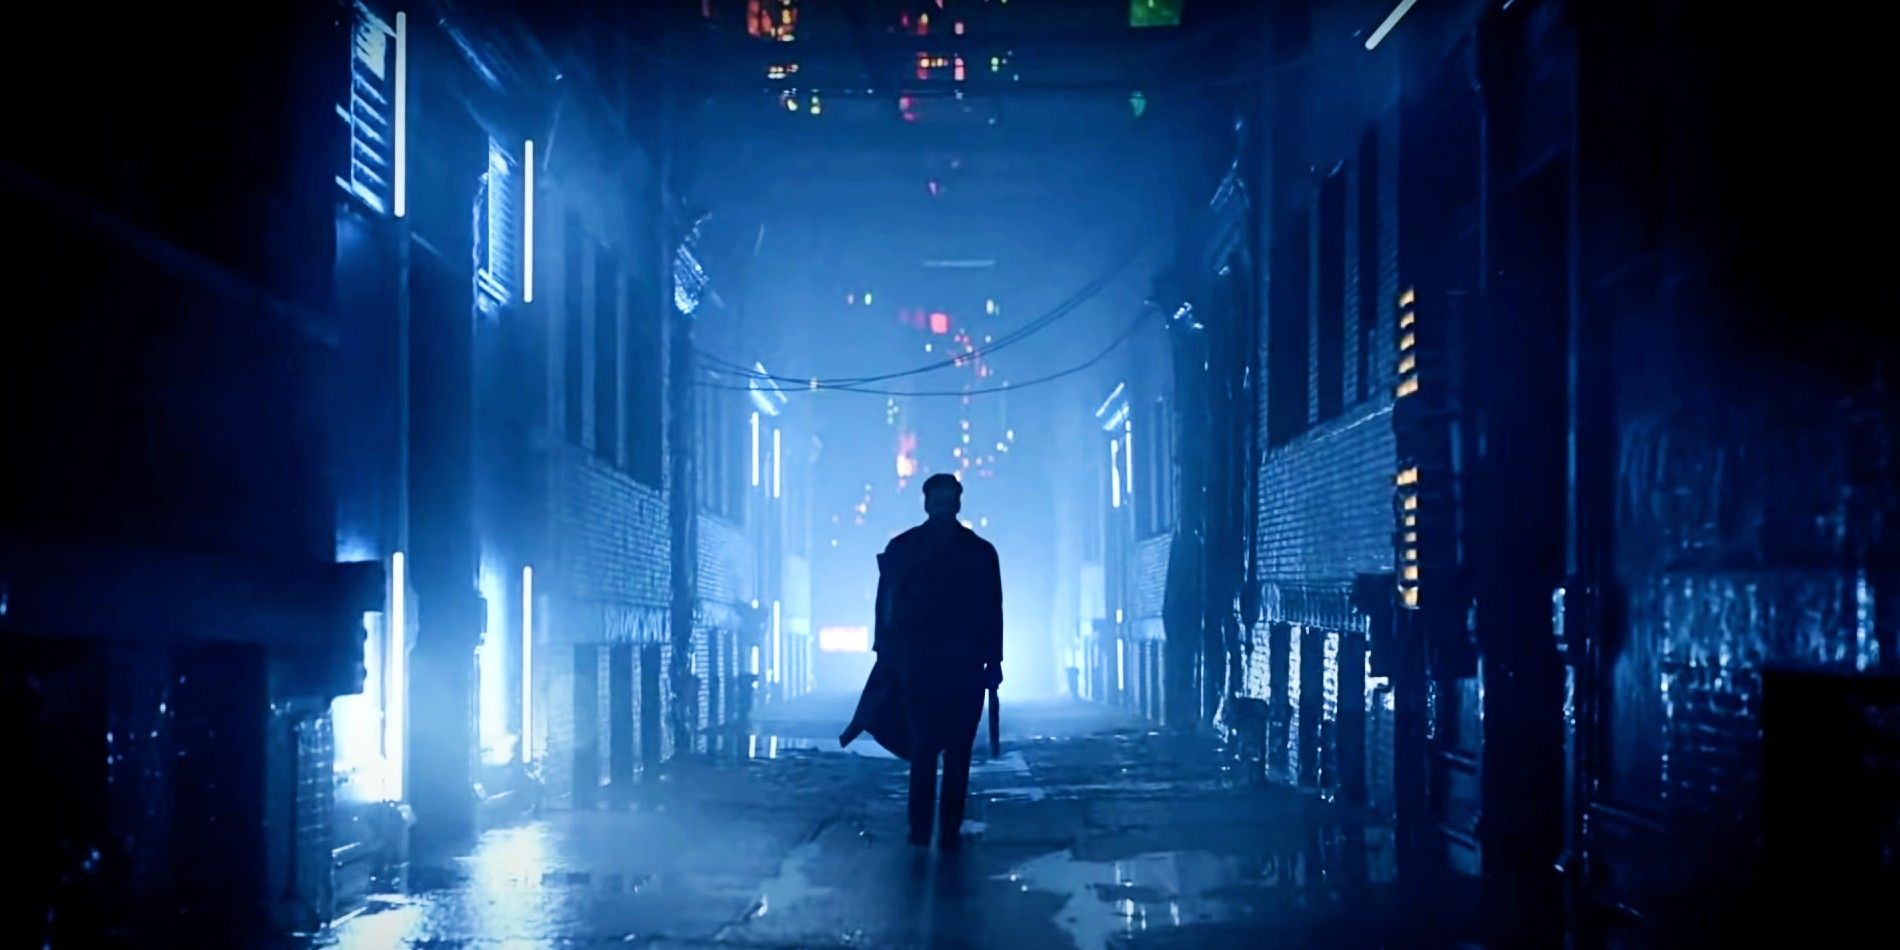 Blade Runner Black Lotus Releases Vibrant New Poster & Opening Sequence